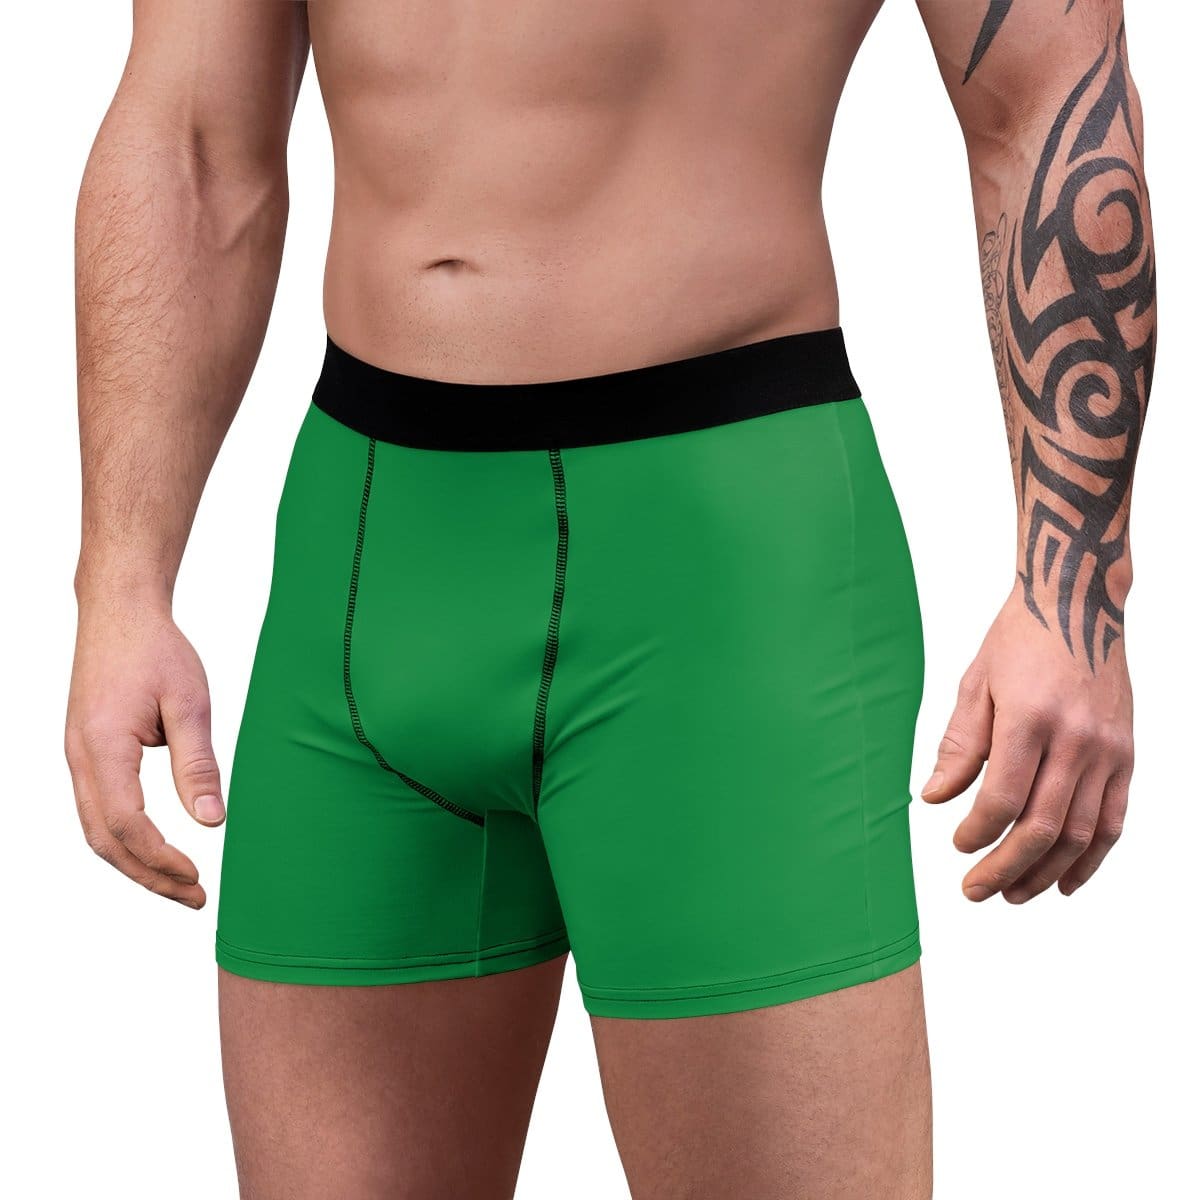 My Bardic Inspiration - Green Boxer Briefs - All Over Prints